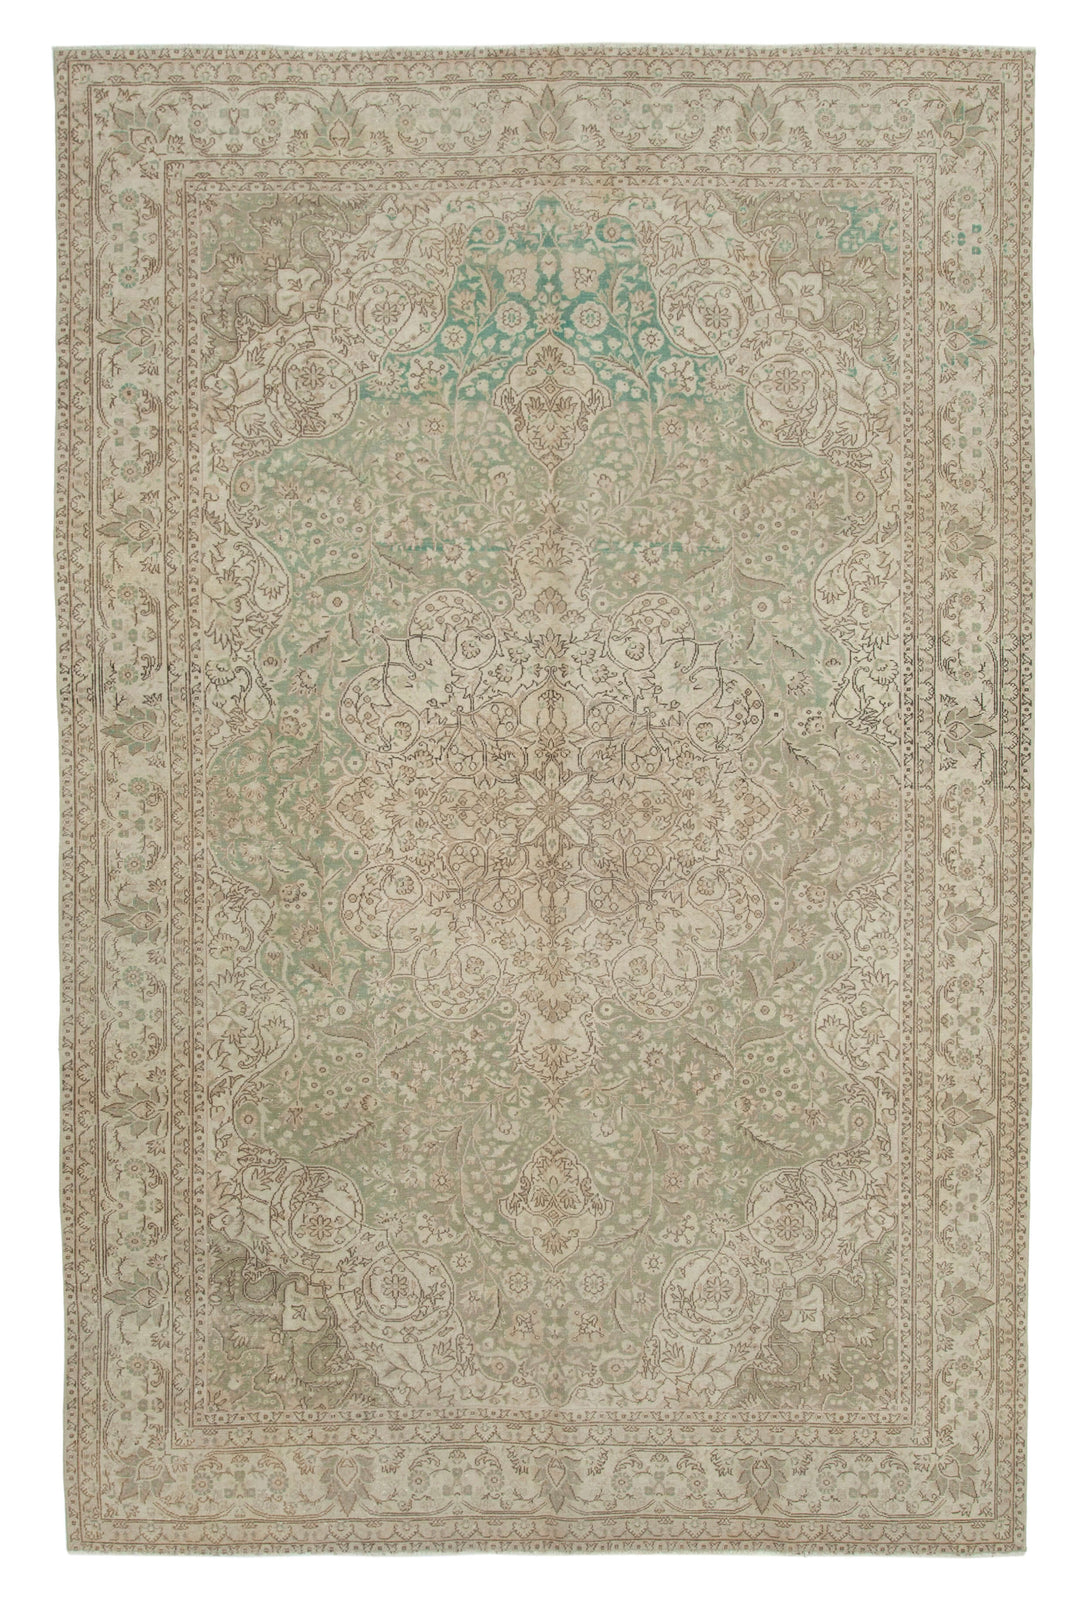 Handmade White Wash Area Rug > Design# OL-AC-35295 > Size: 6'-8" x 10'-3", Carpet Culture Rugs, Handmade Rugs, NYC Rugs, New Rugs, Shop Rugs, Rug Store, Outlet Rugs, SoHo Rugs, Rugs in USA